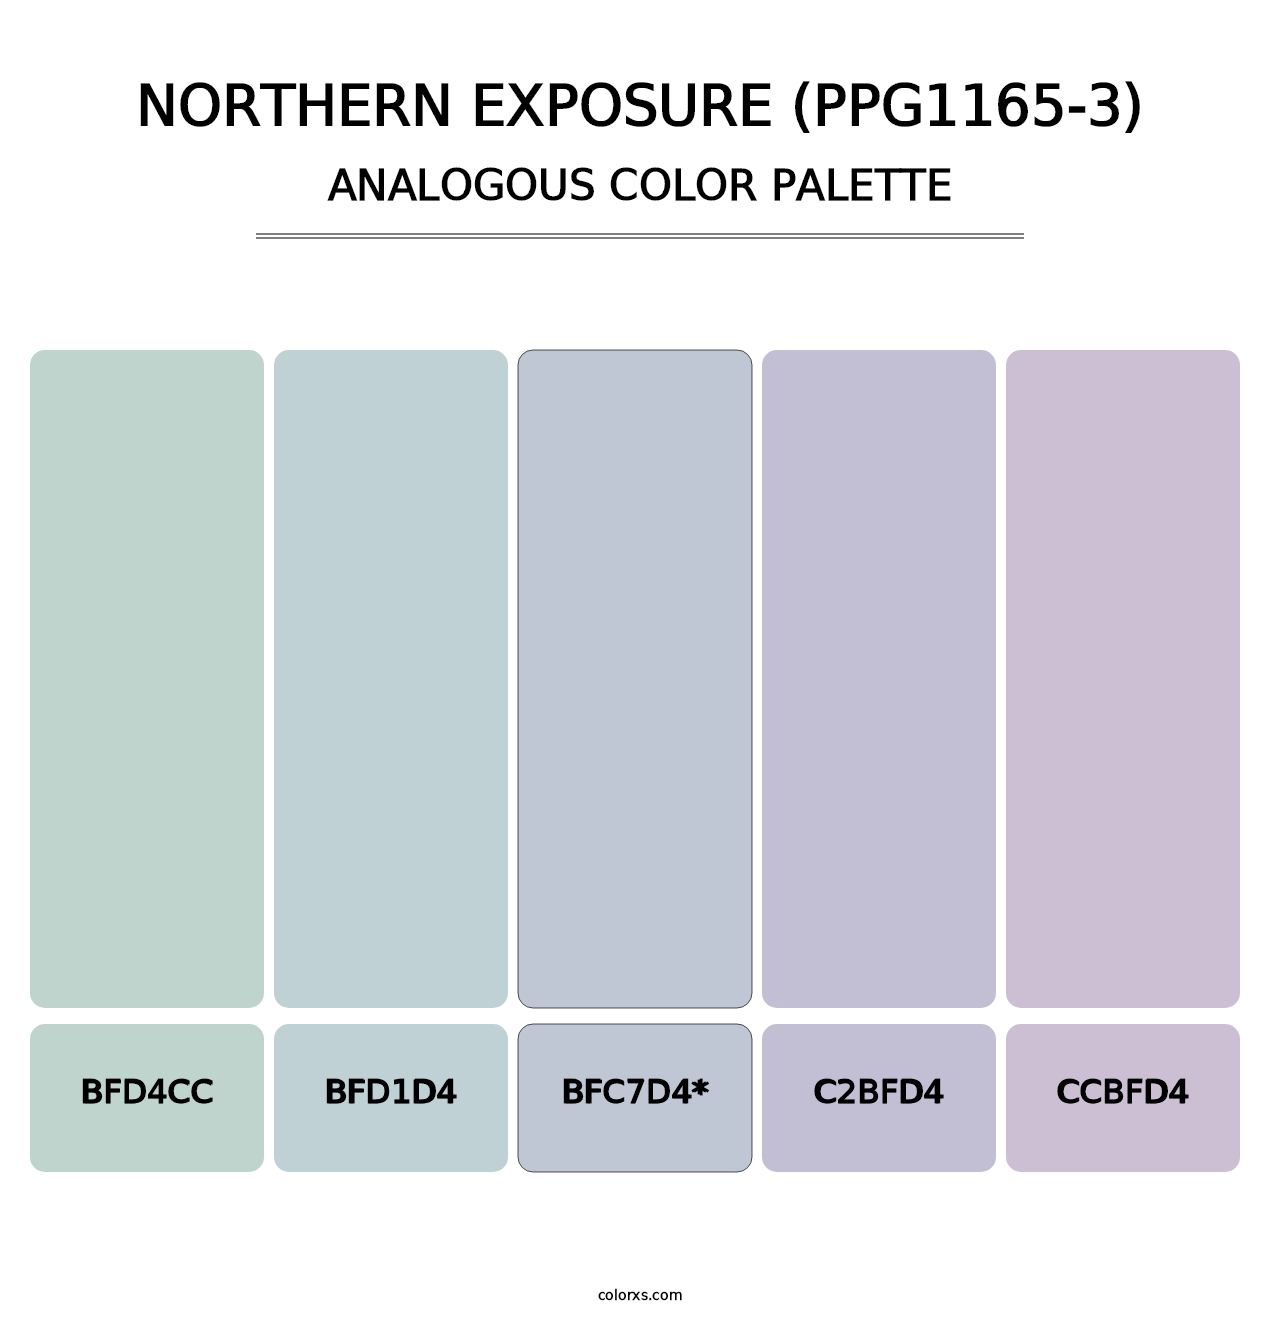 Northern Exposure (PPG1165-3) - Analogous Color Palette